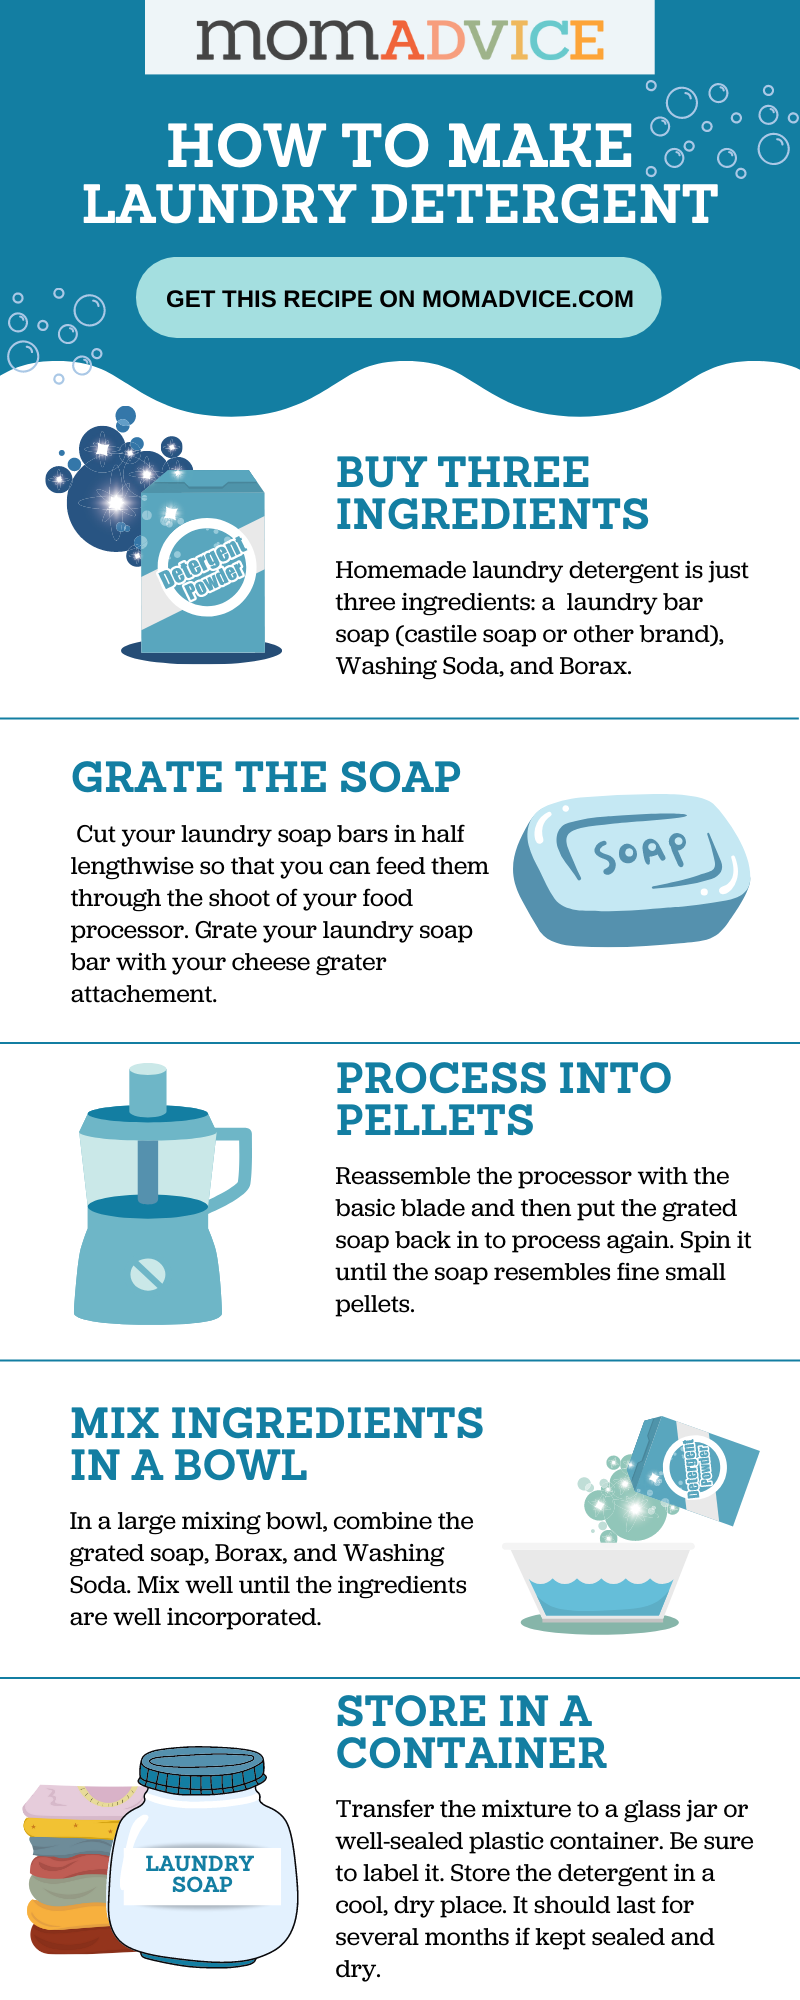 How to Make Homemade Laundry Detergent Infographic